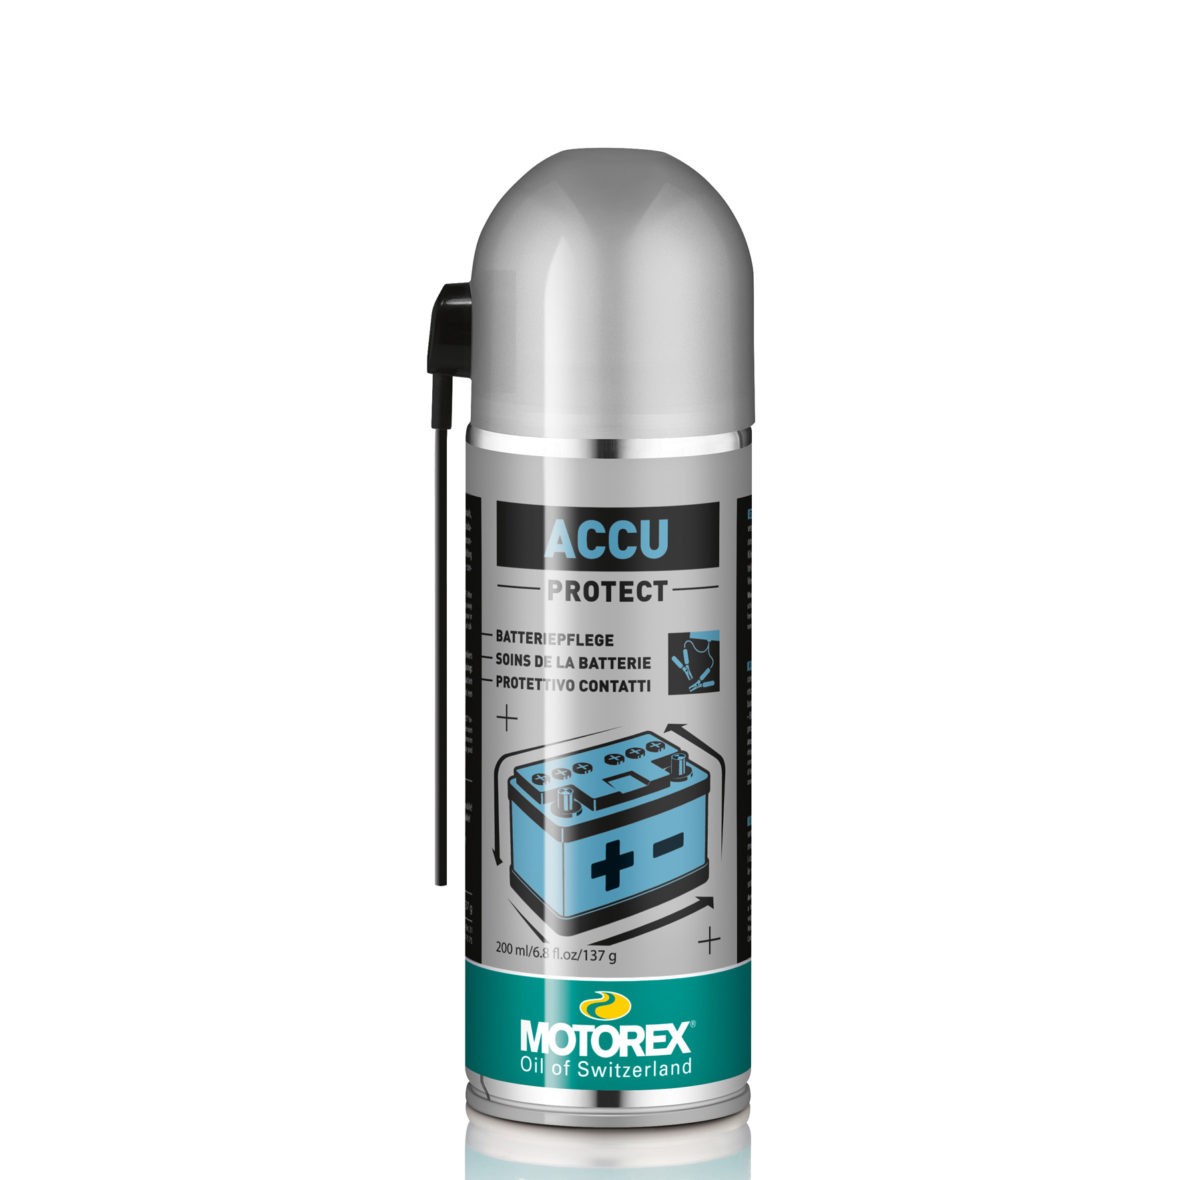 MOTOREX Accu Protect 7611197163923 Battery Post Grease Capacity: 200ml, high corrosion protection, Water-repellent, aerosol